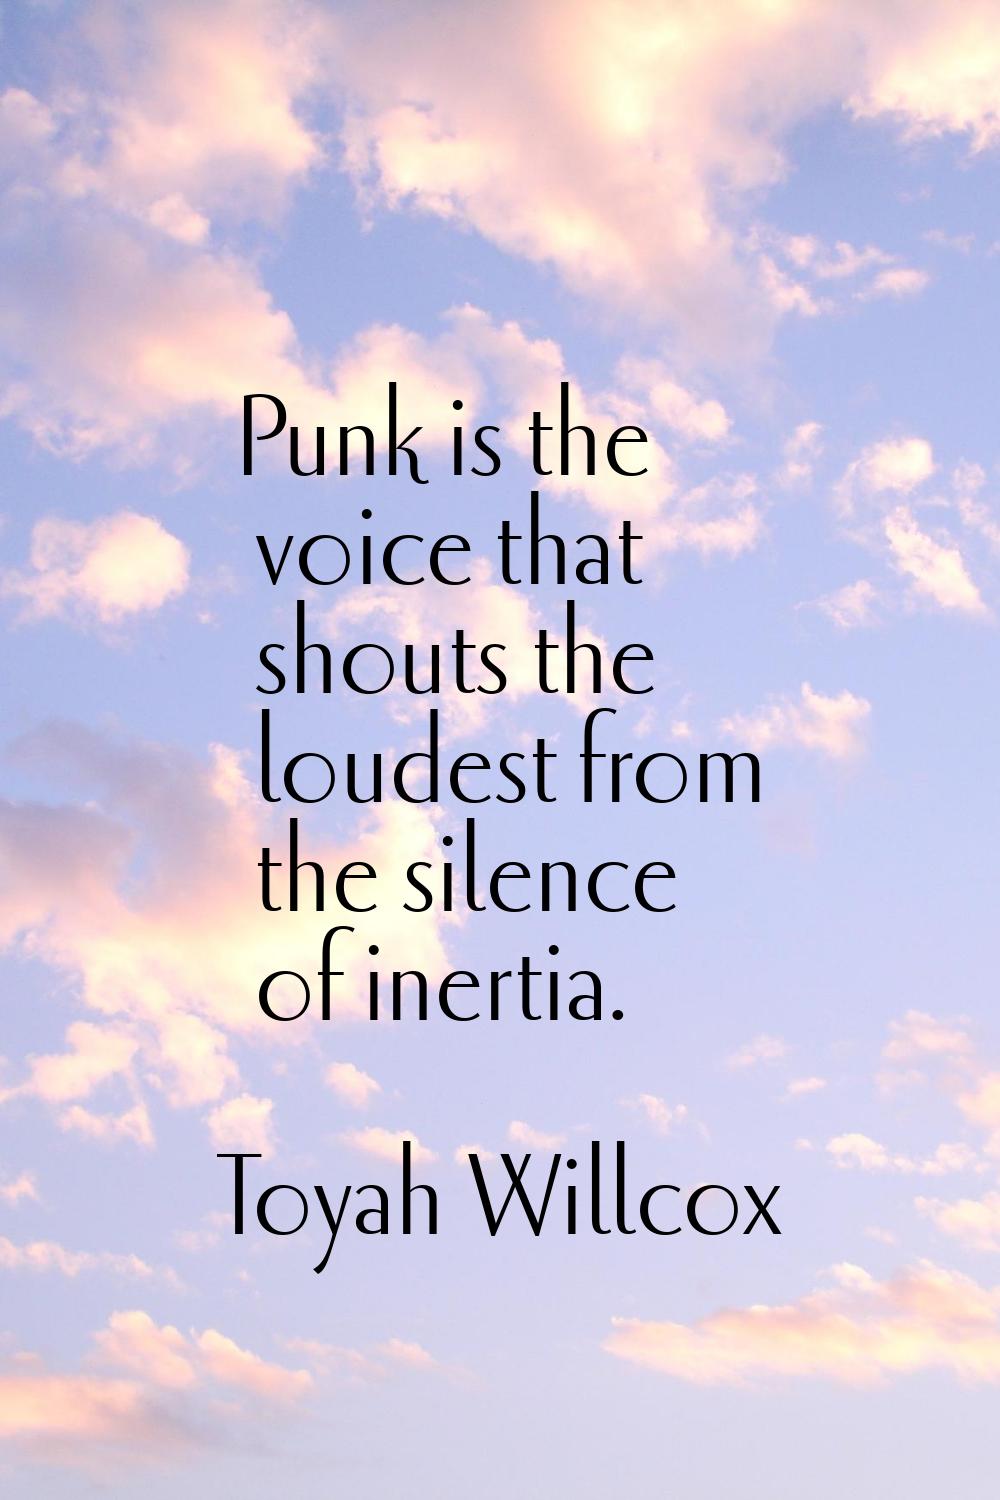 Punk is the voice that shouts the loudest from the silence of inertia.